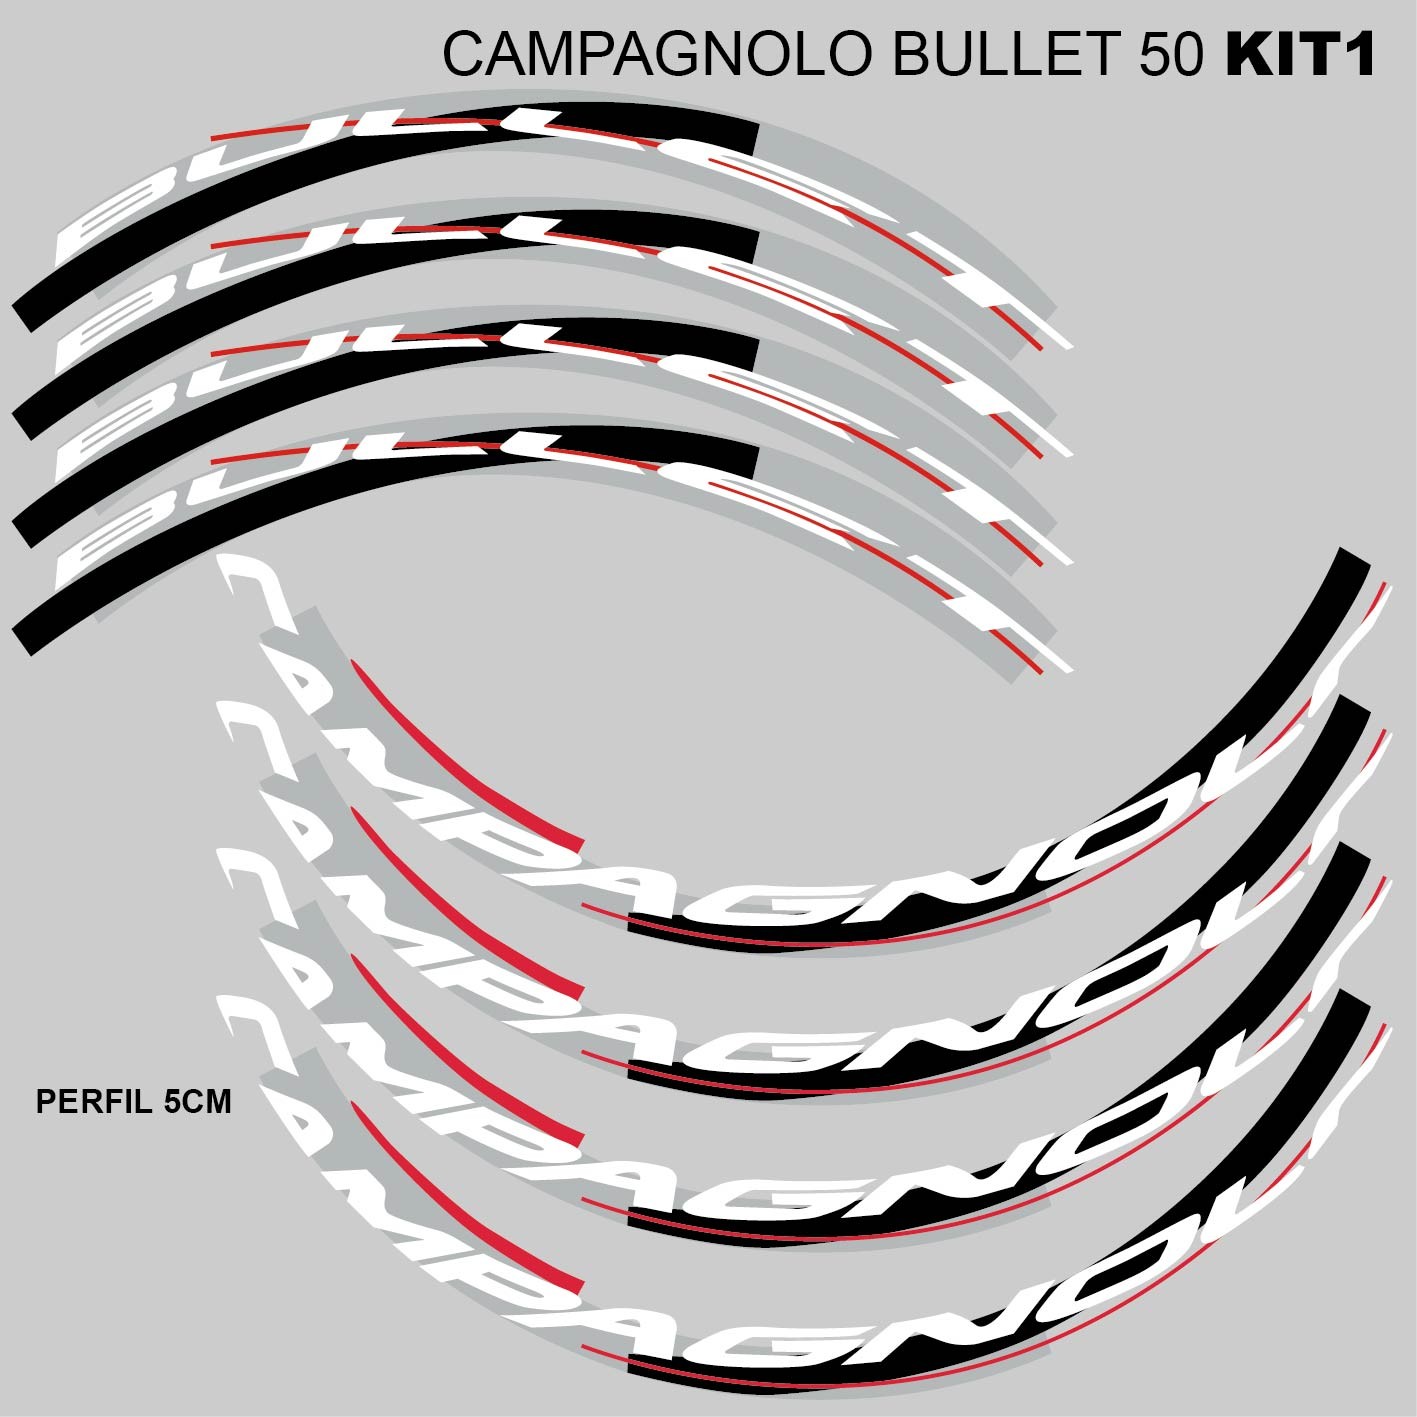 Campagnolo Bullet 50 stickers.